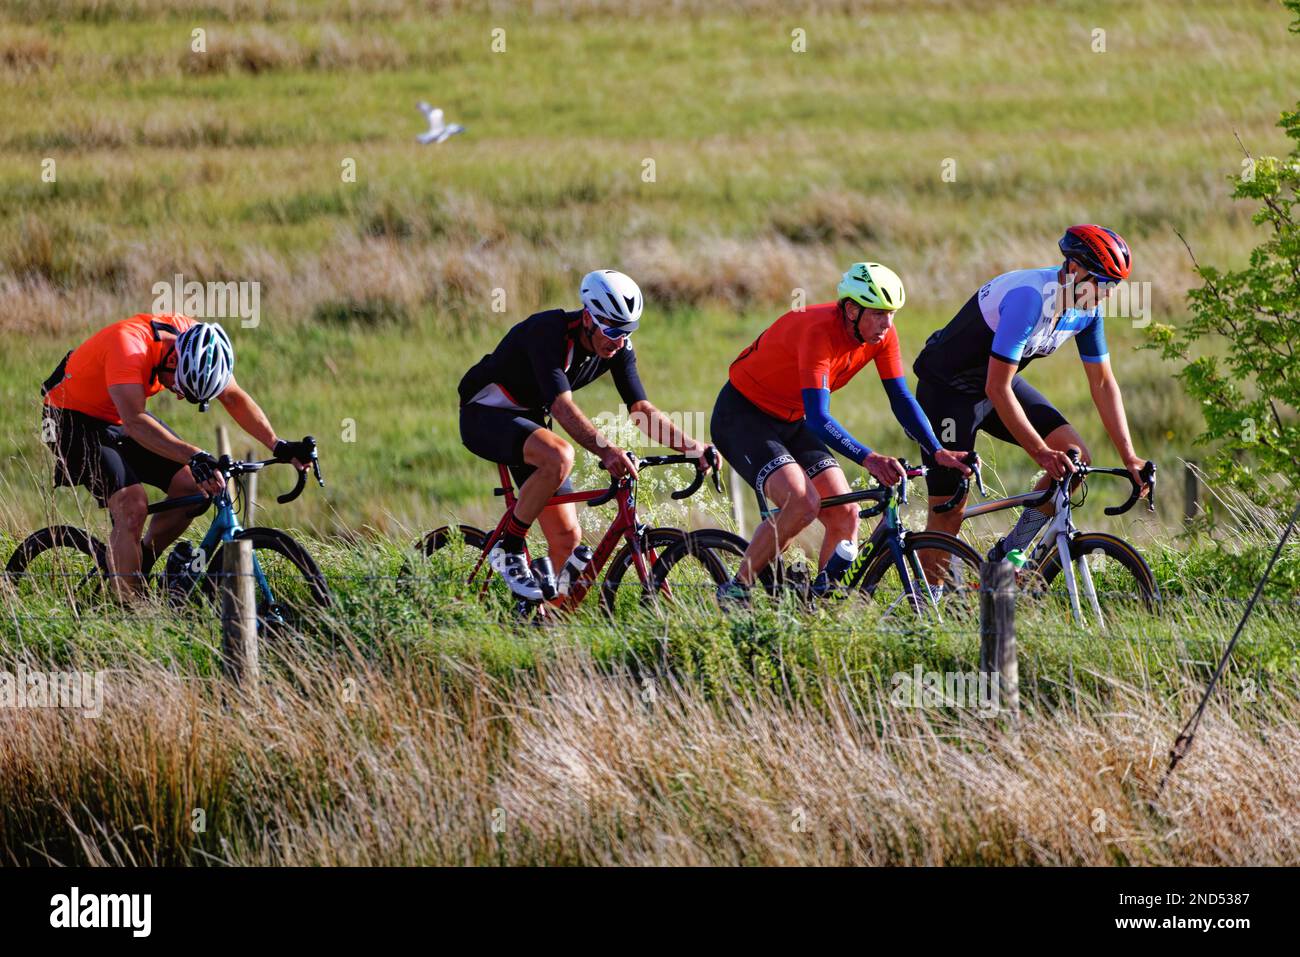 Group of cyclists on mountain bikes cycling in a rural setting Stock Photo